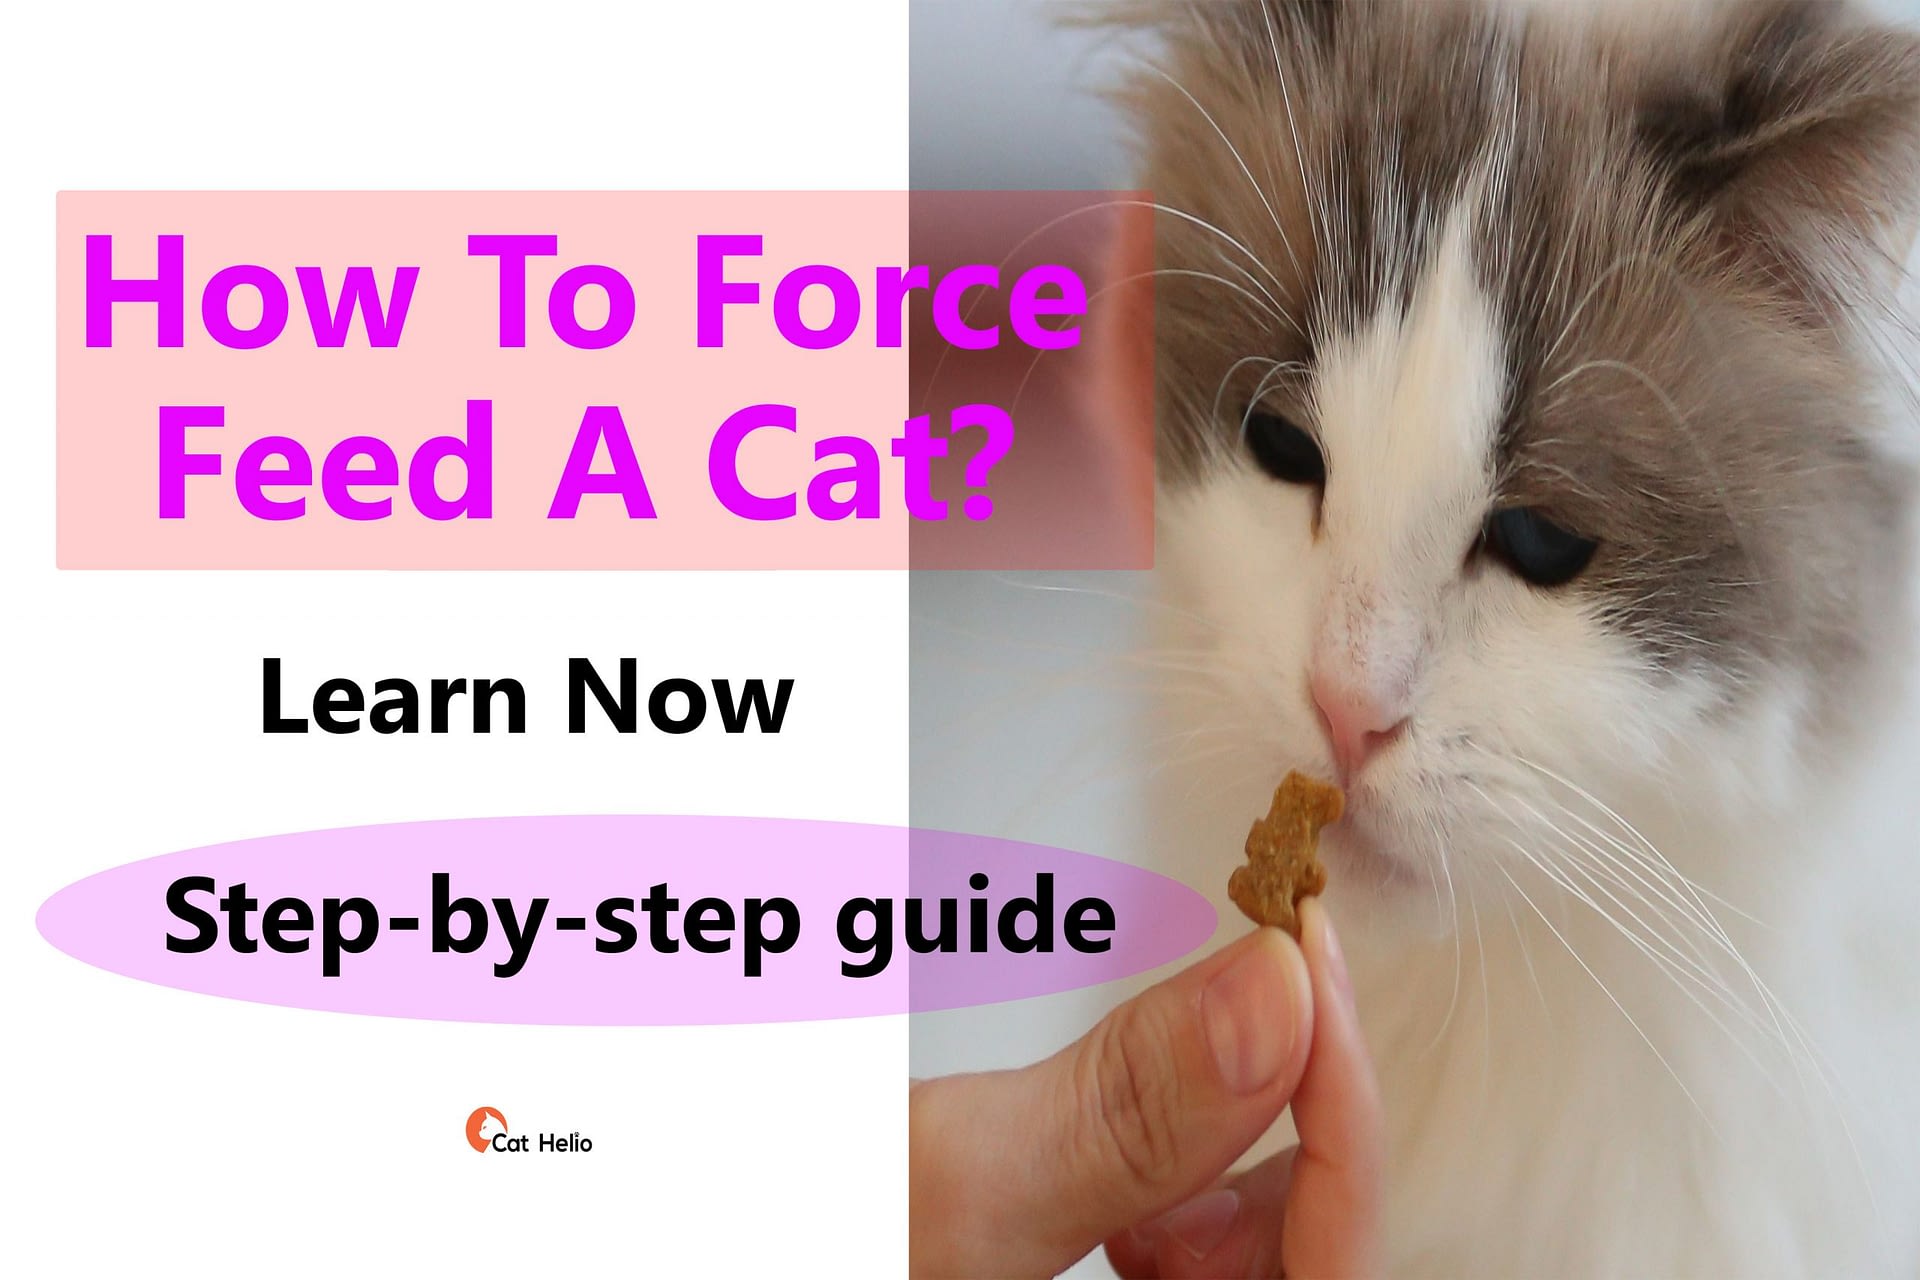 How To Force Feed A Cat? Stepbystep guide Cat Helio